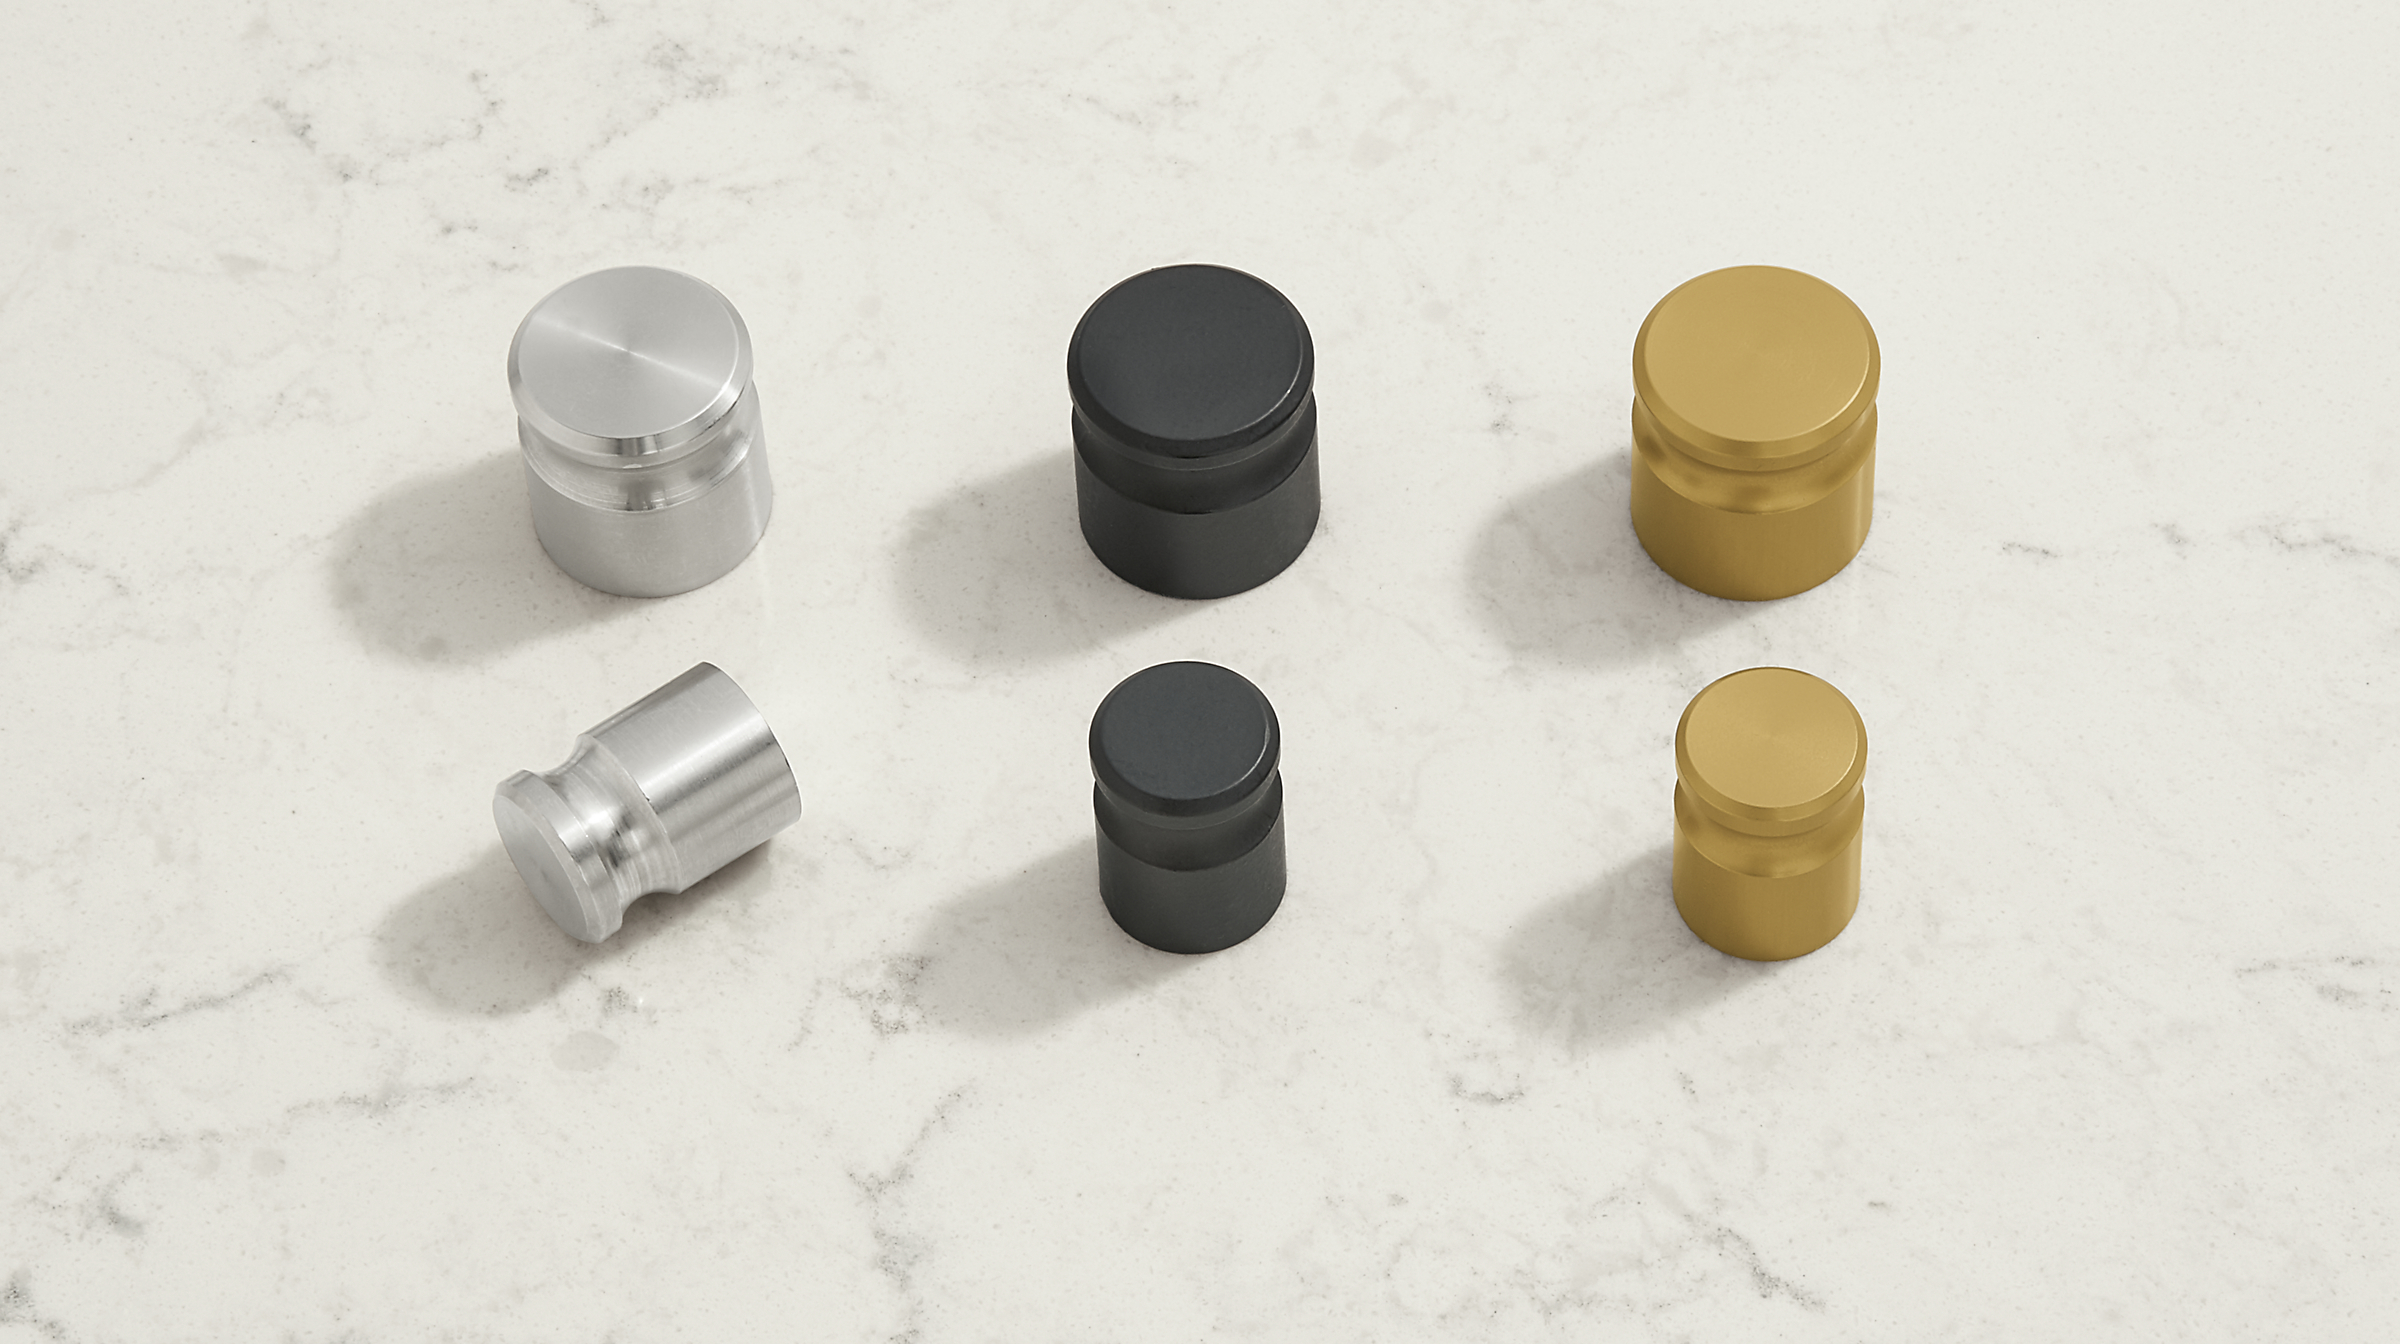 stanwell knobs in stainless steel, graphite, brushed gold.